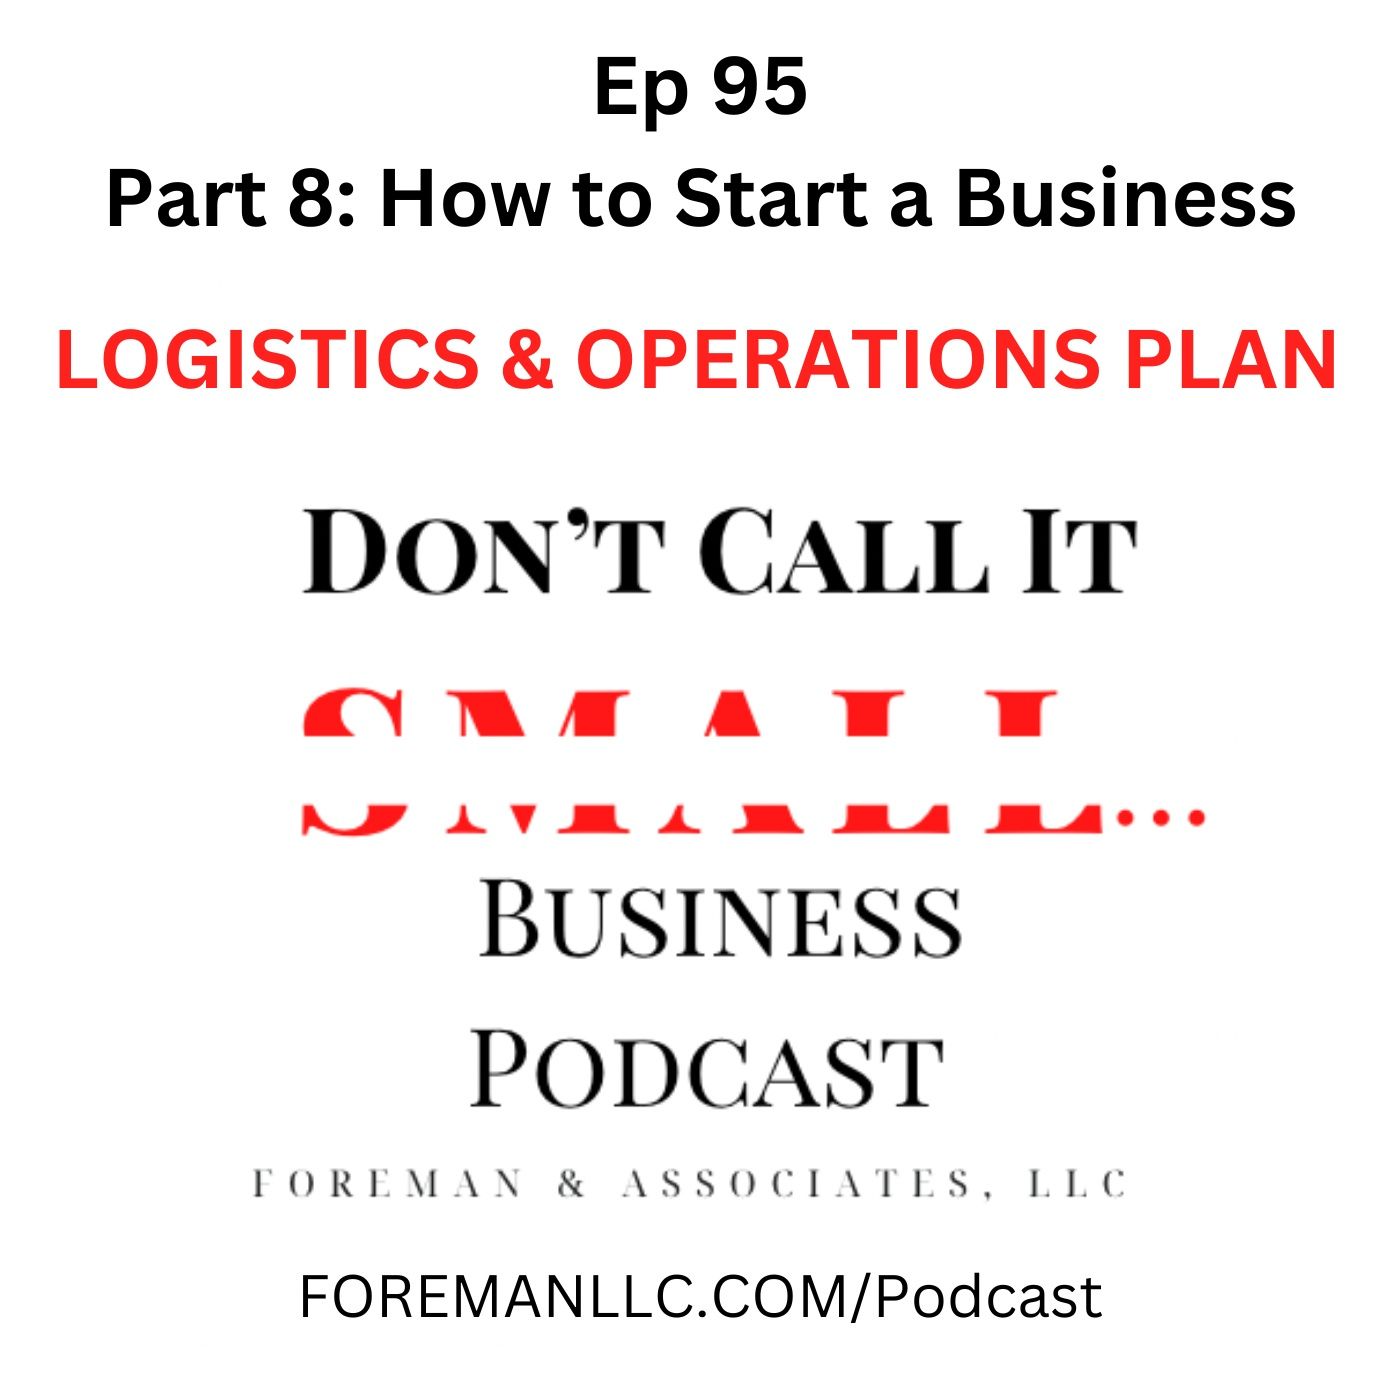 Ep 95 Part 8 How to Start a Business [Logistics and Operations Plan]